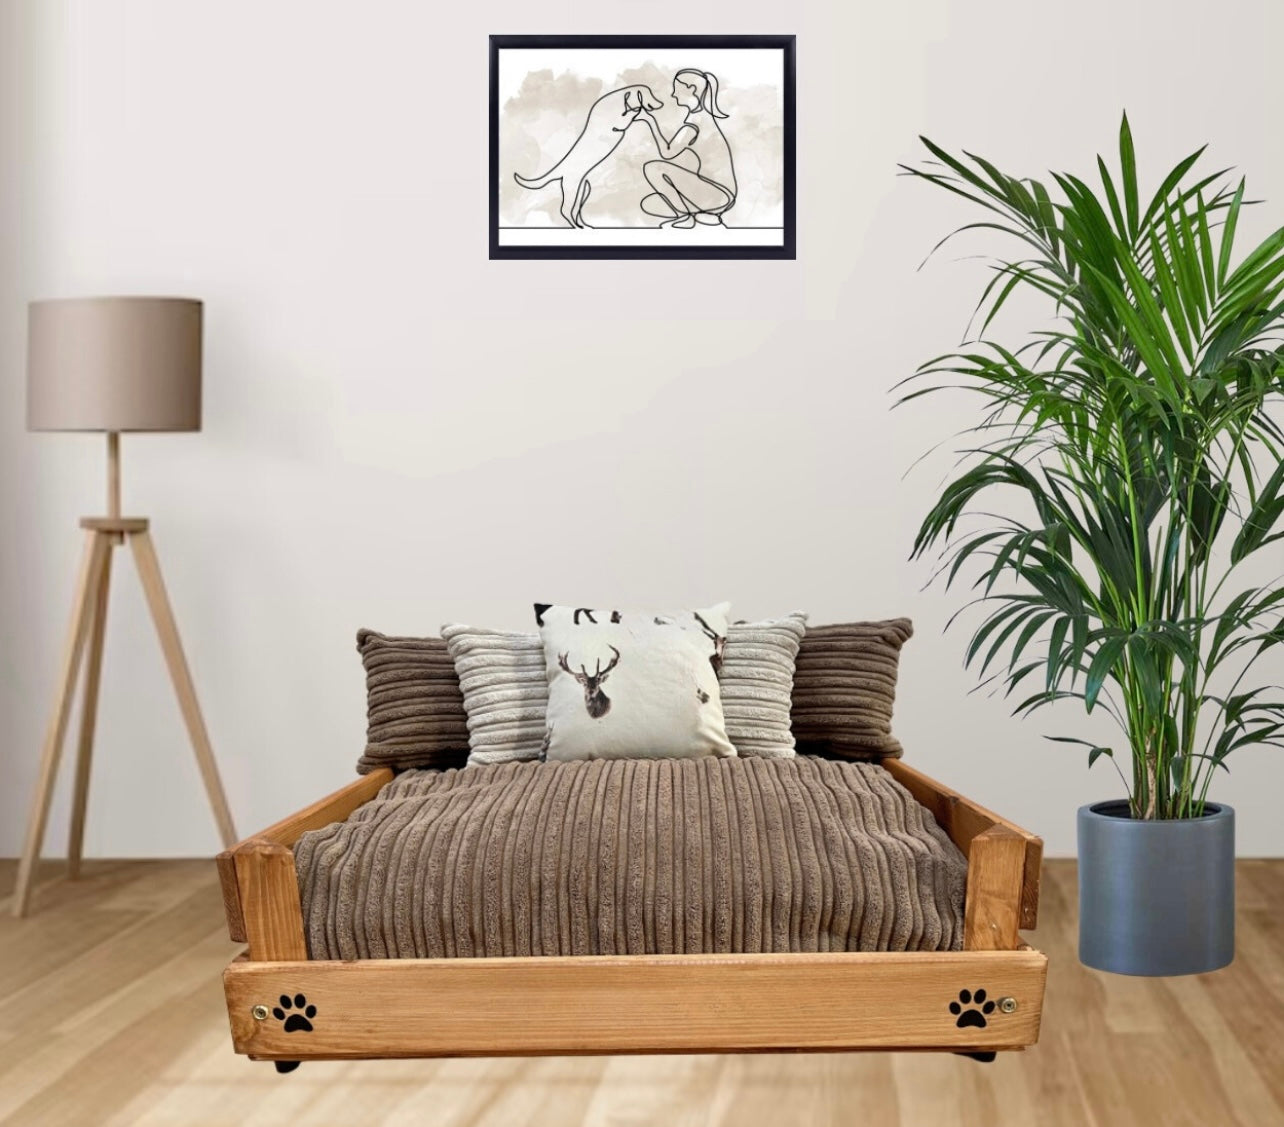 Medium Wooden Personalised Dog Bed (59 x 76cm) - Royal Oak & Stag